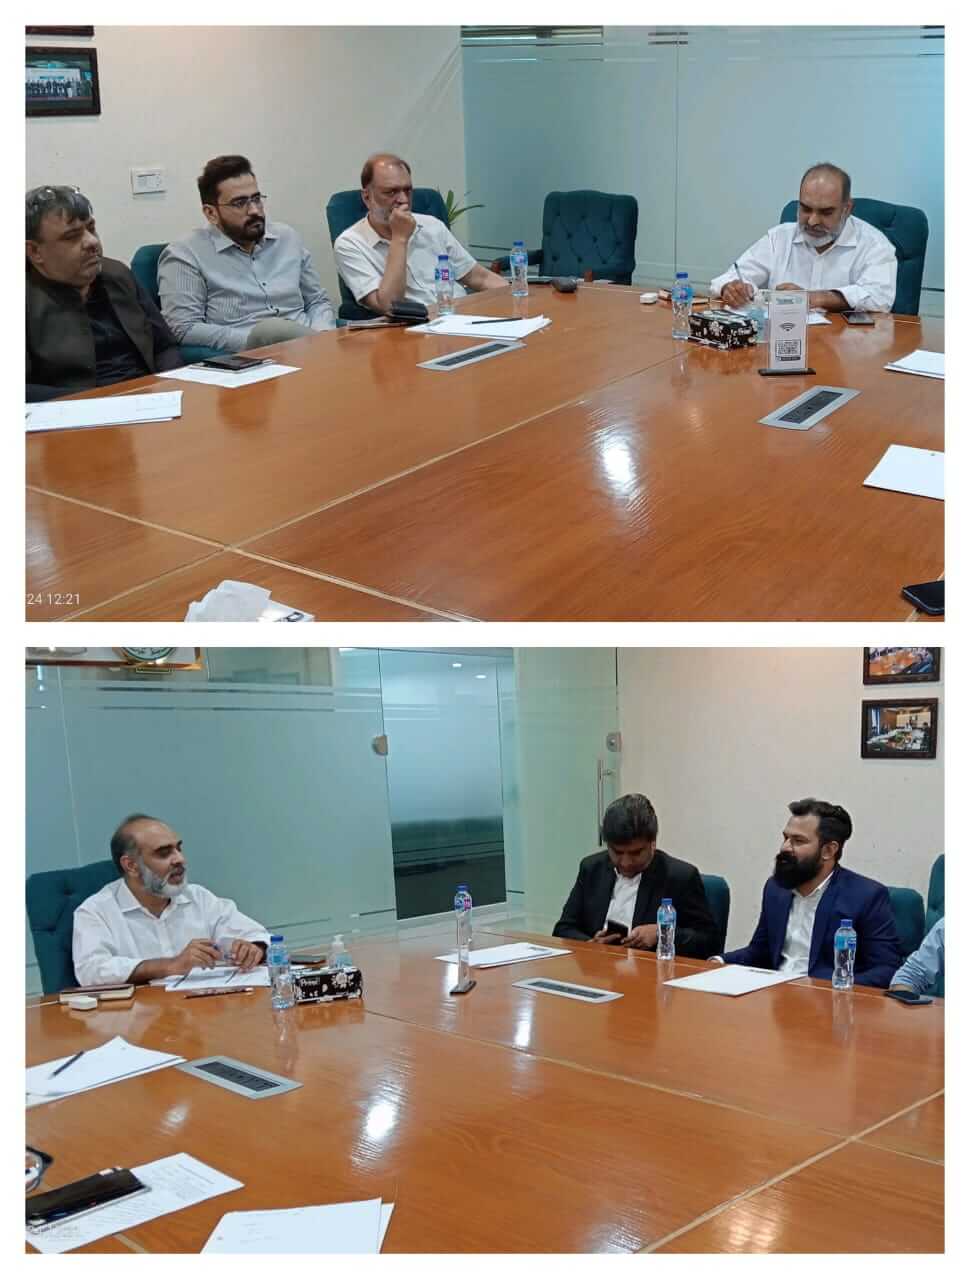 April 24th, 2024, CTO, SEZMC chaired a progress review meeting for the Dhabeji Special Economic Zone (DSEZ). The meeting included representatives from the developer ZKBDMC, A.F. Ferguson & Co. (Chartered Accountants), and engineering firms IE EA Engg